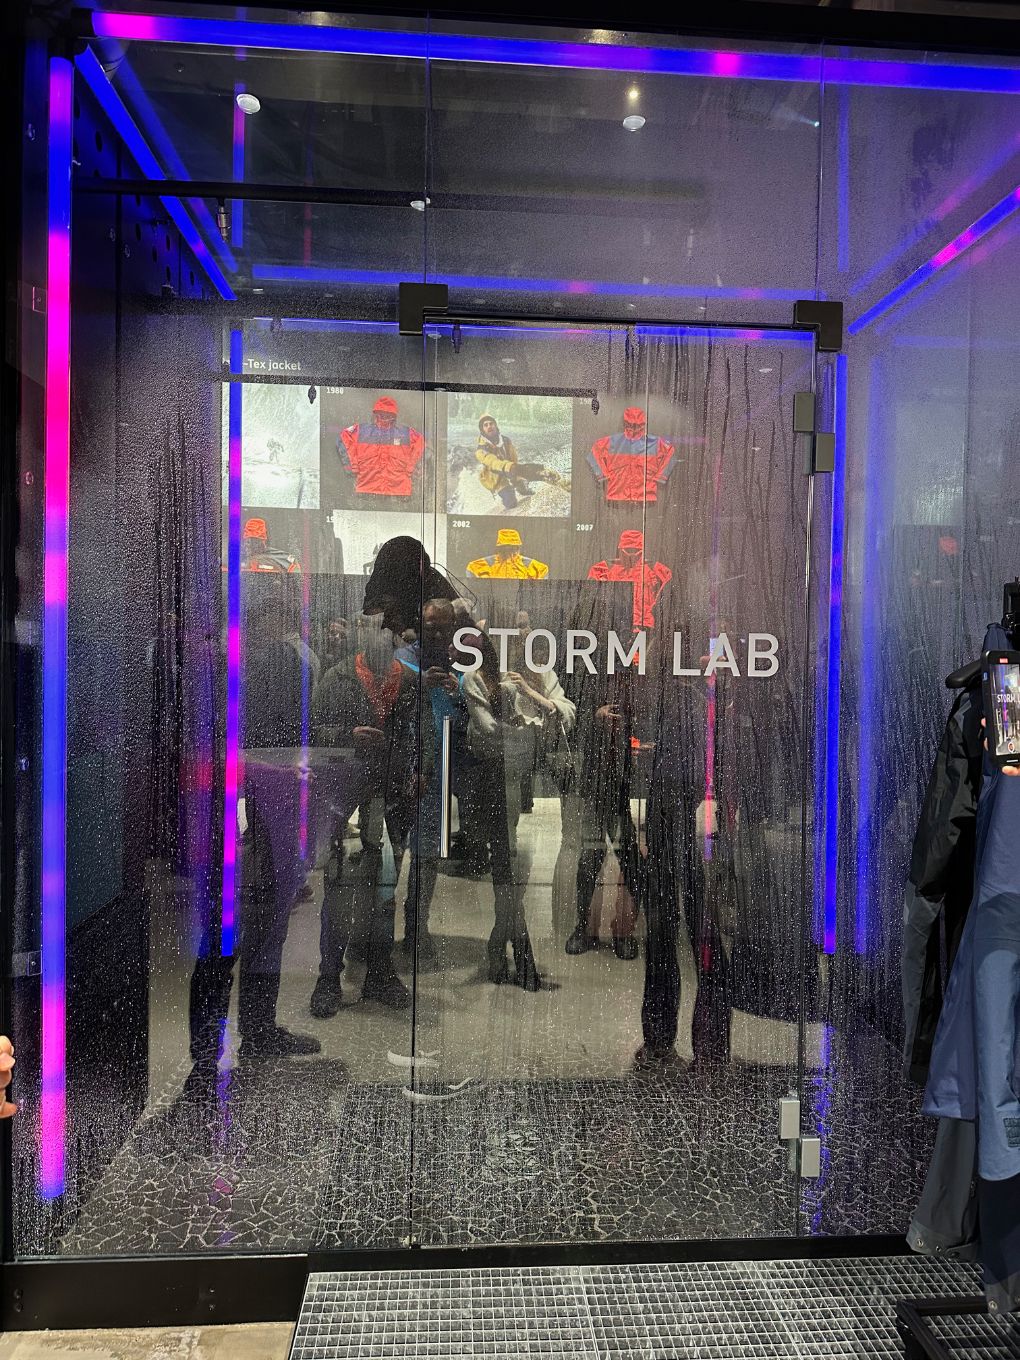 Customers can test clothing in the 'Storm Lab'. Photo: David Nikel.